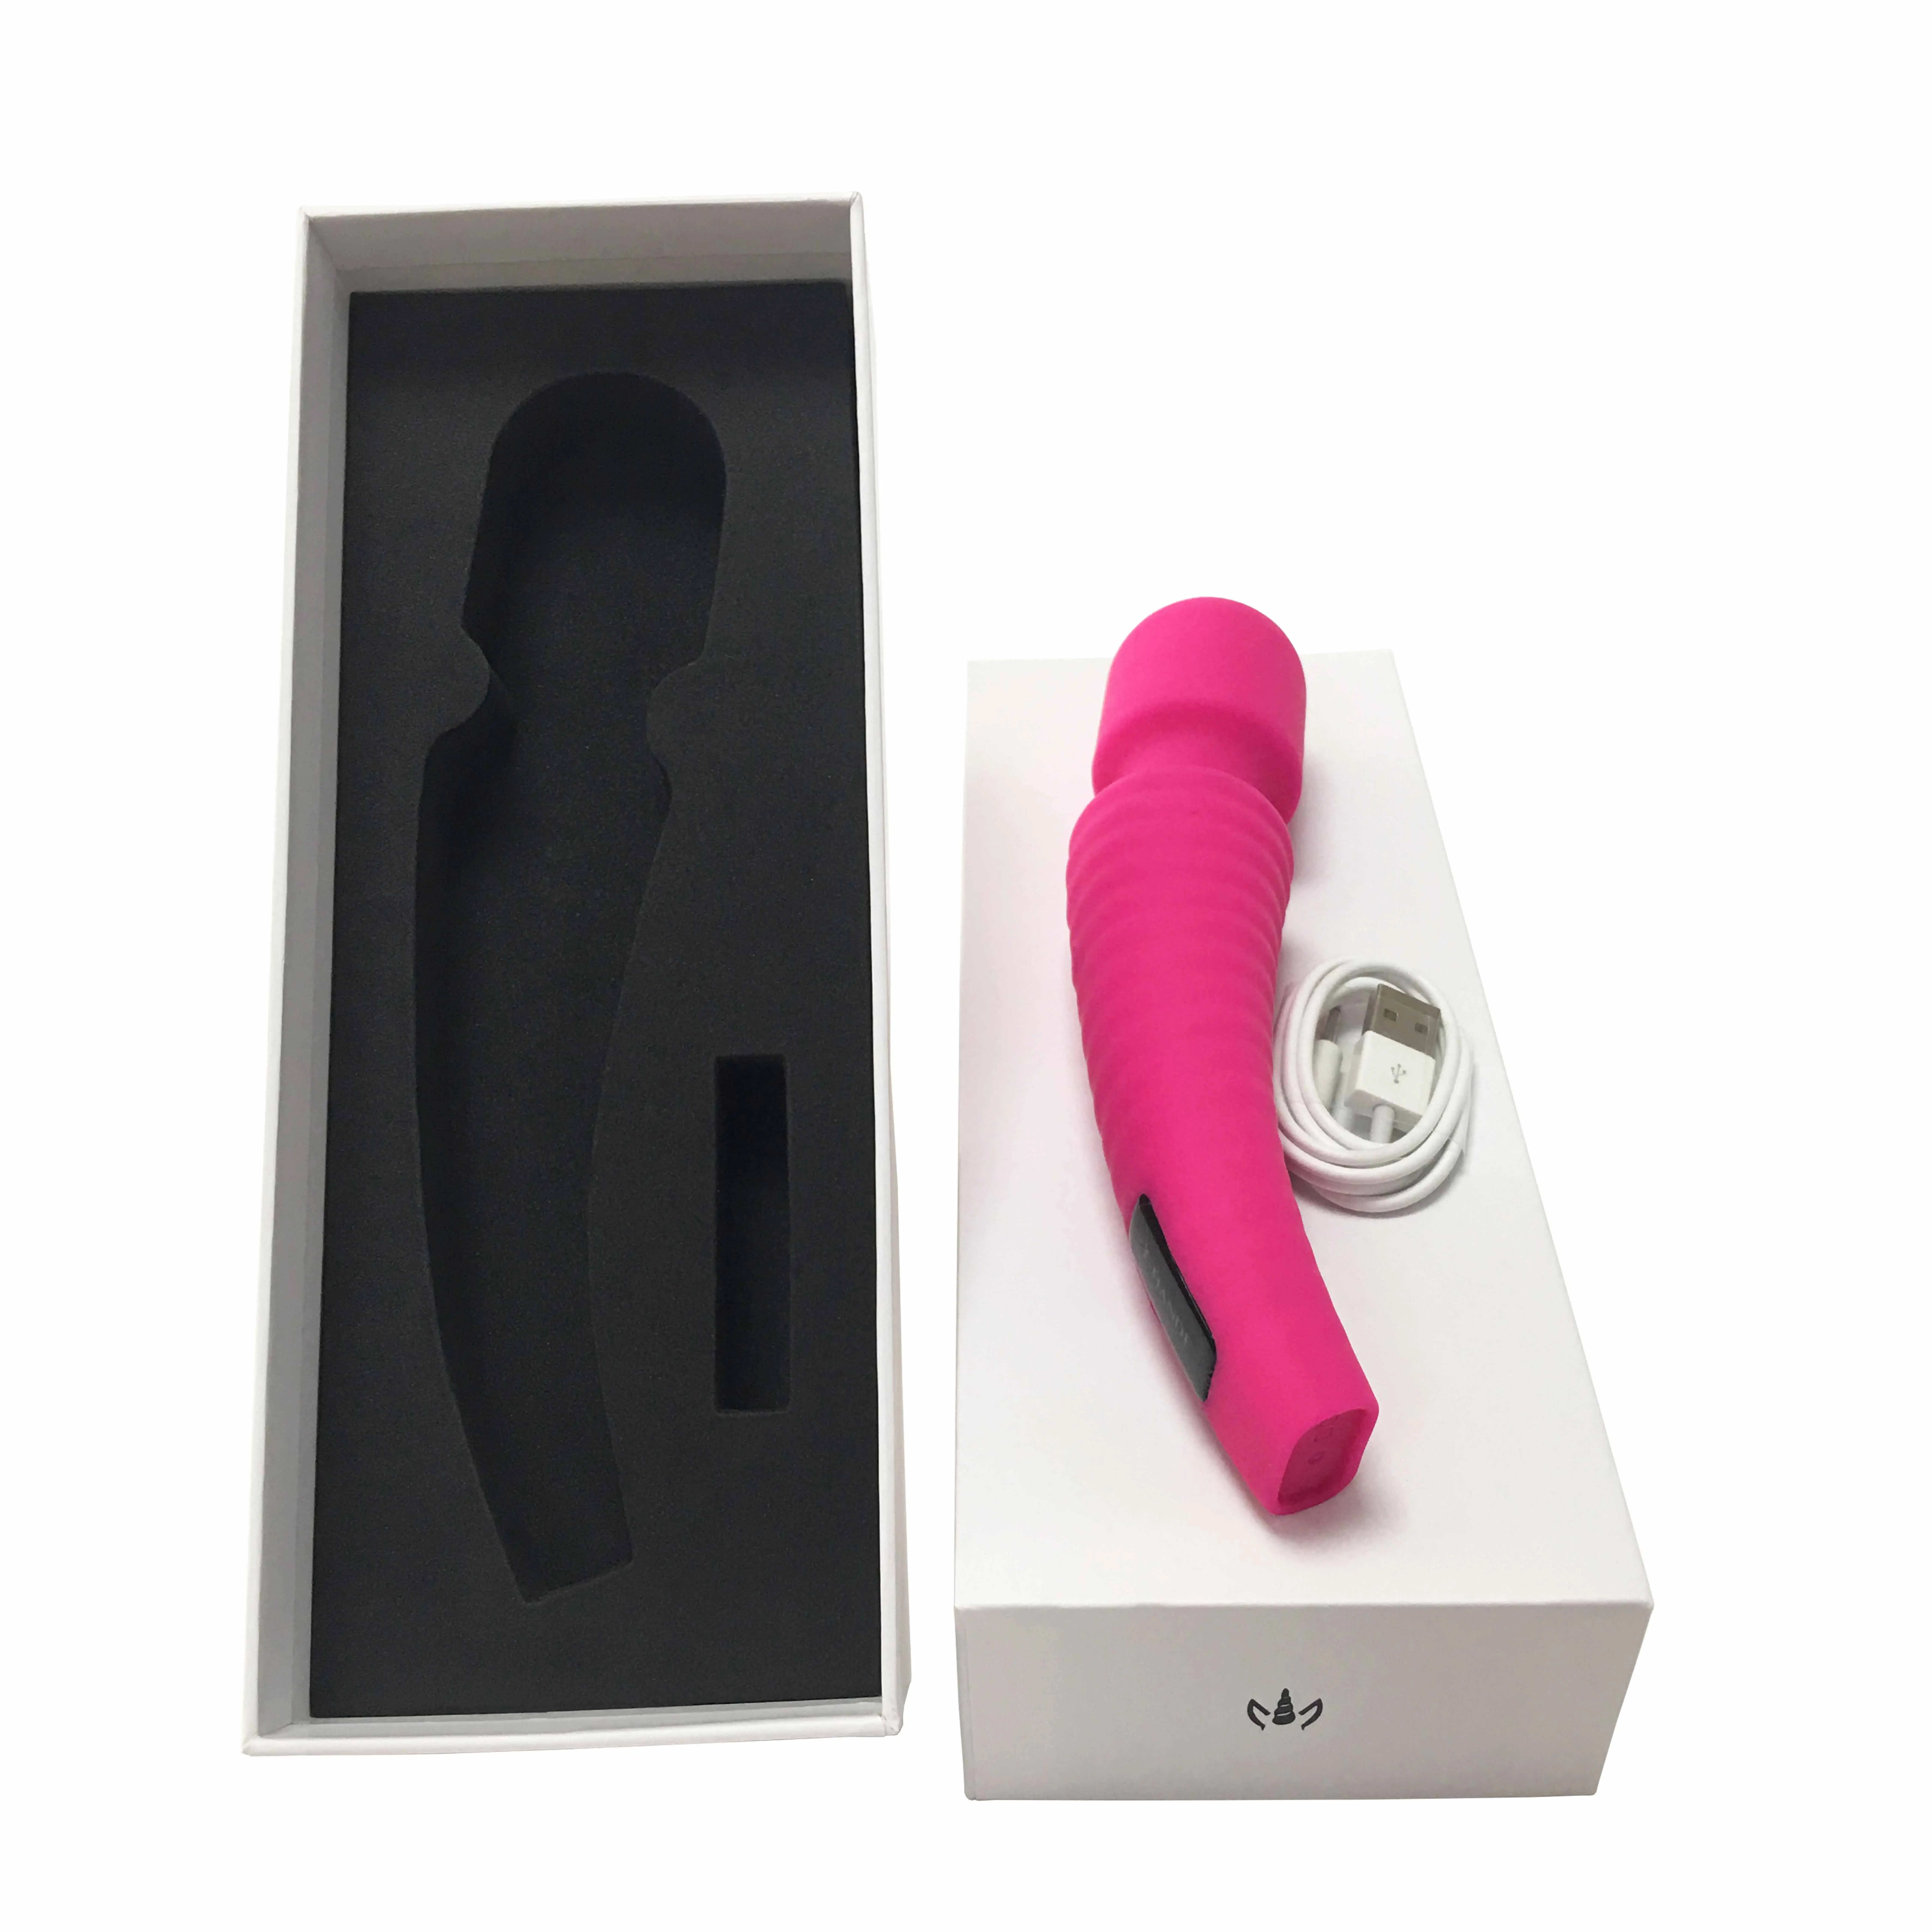 Wholesale Luxury hot sale sex toy gift sexy game packaging box